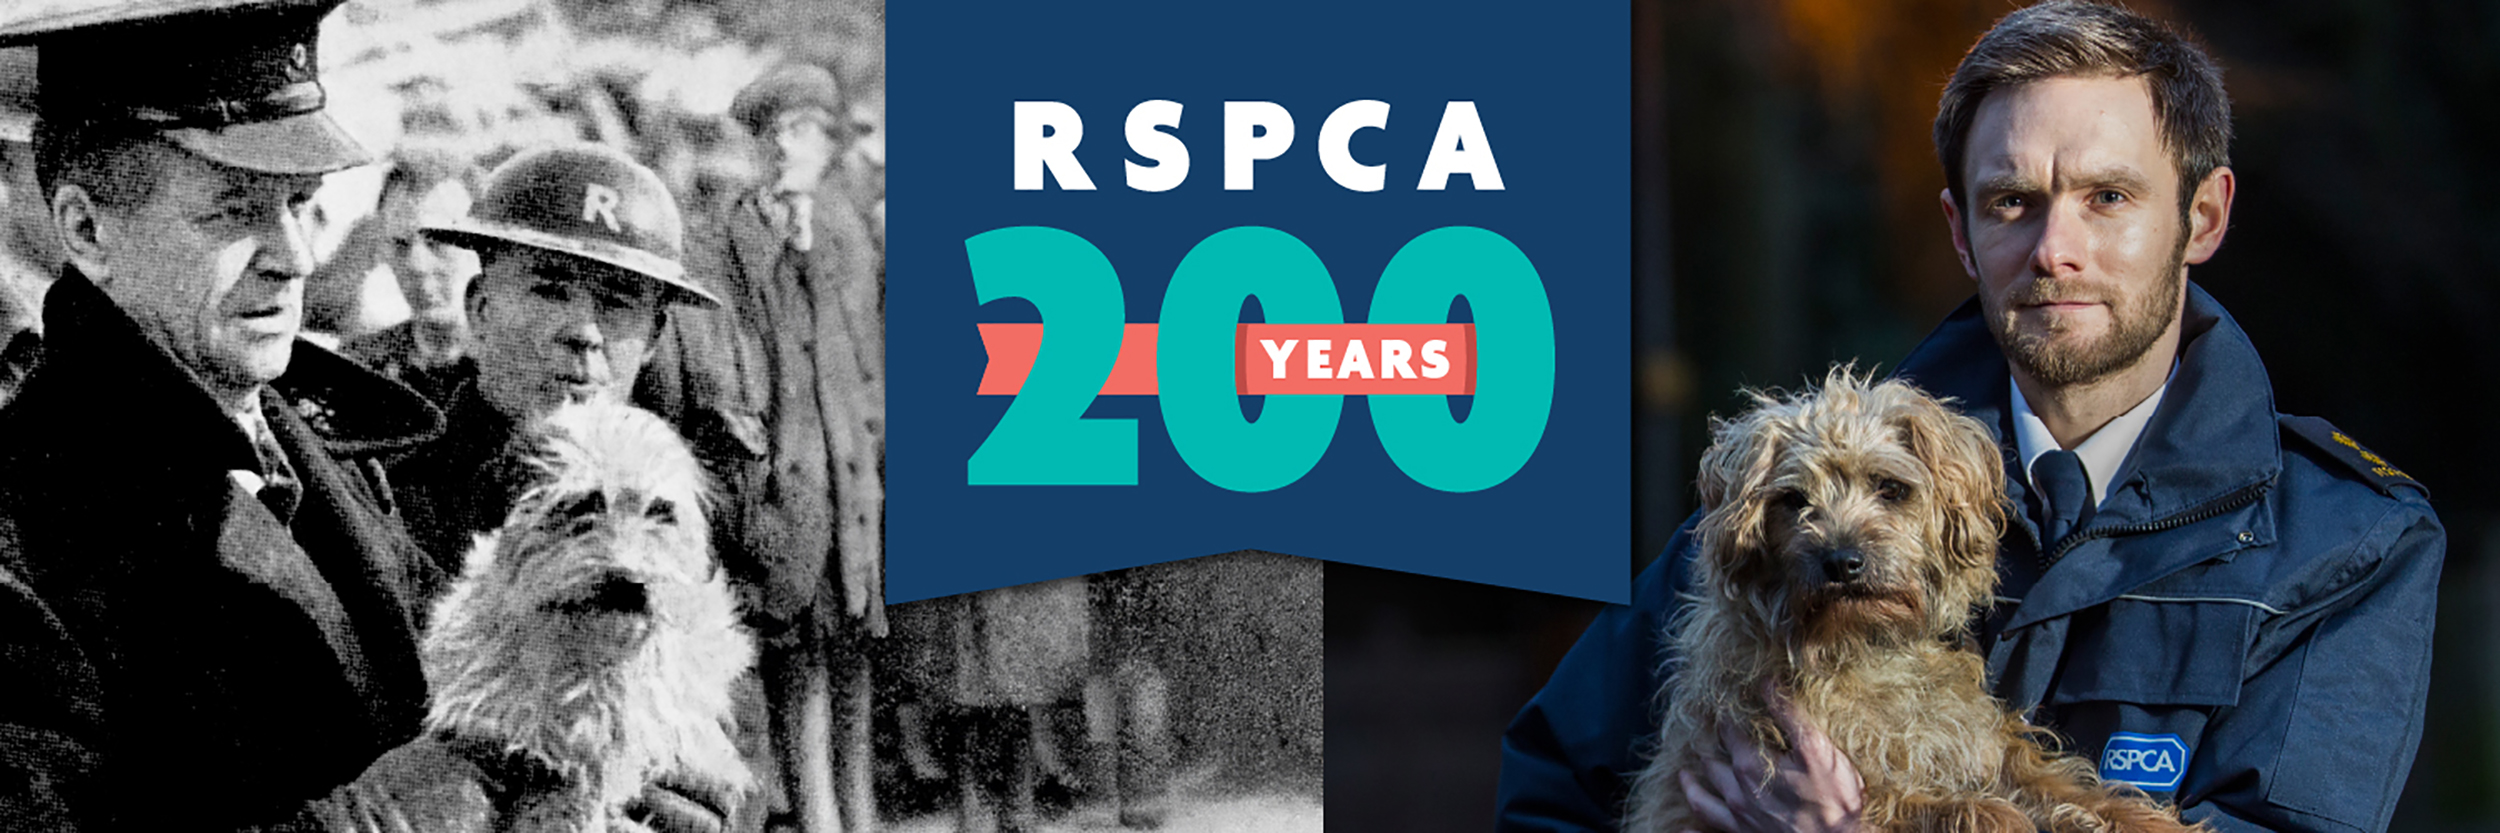 RSPCA 200 years celebration at Woodside Leicester Animal Centre